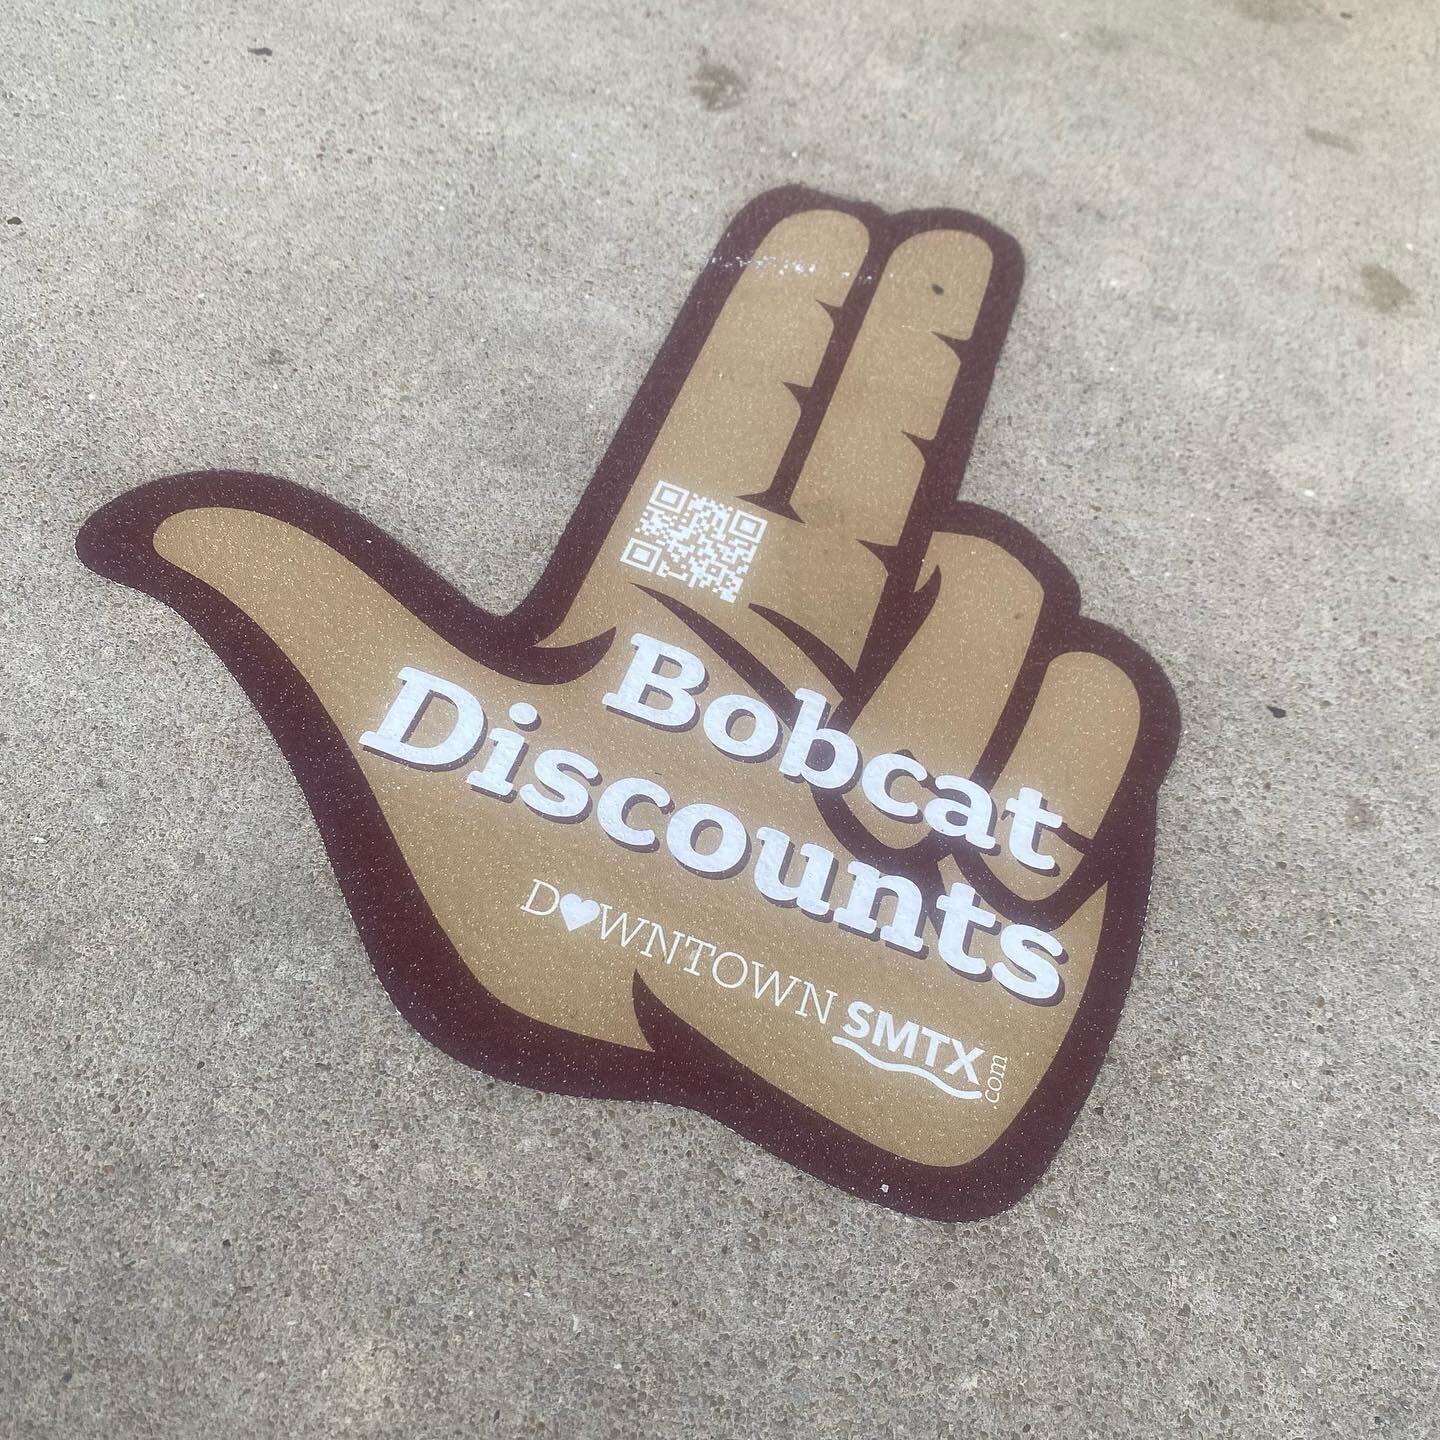 We are now offering Texas State student discounts with student ID. Come on by and see us 🖤 
(Does not stack with other sale items)
.
.
.
.
#sanmarcos #txst23 #student #tattooshop #piercings #savings